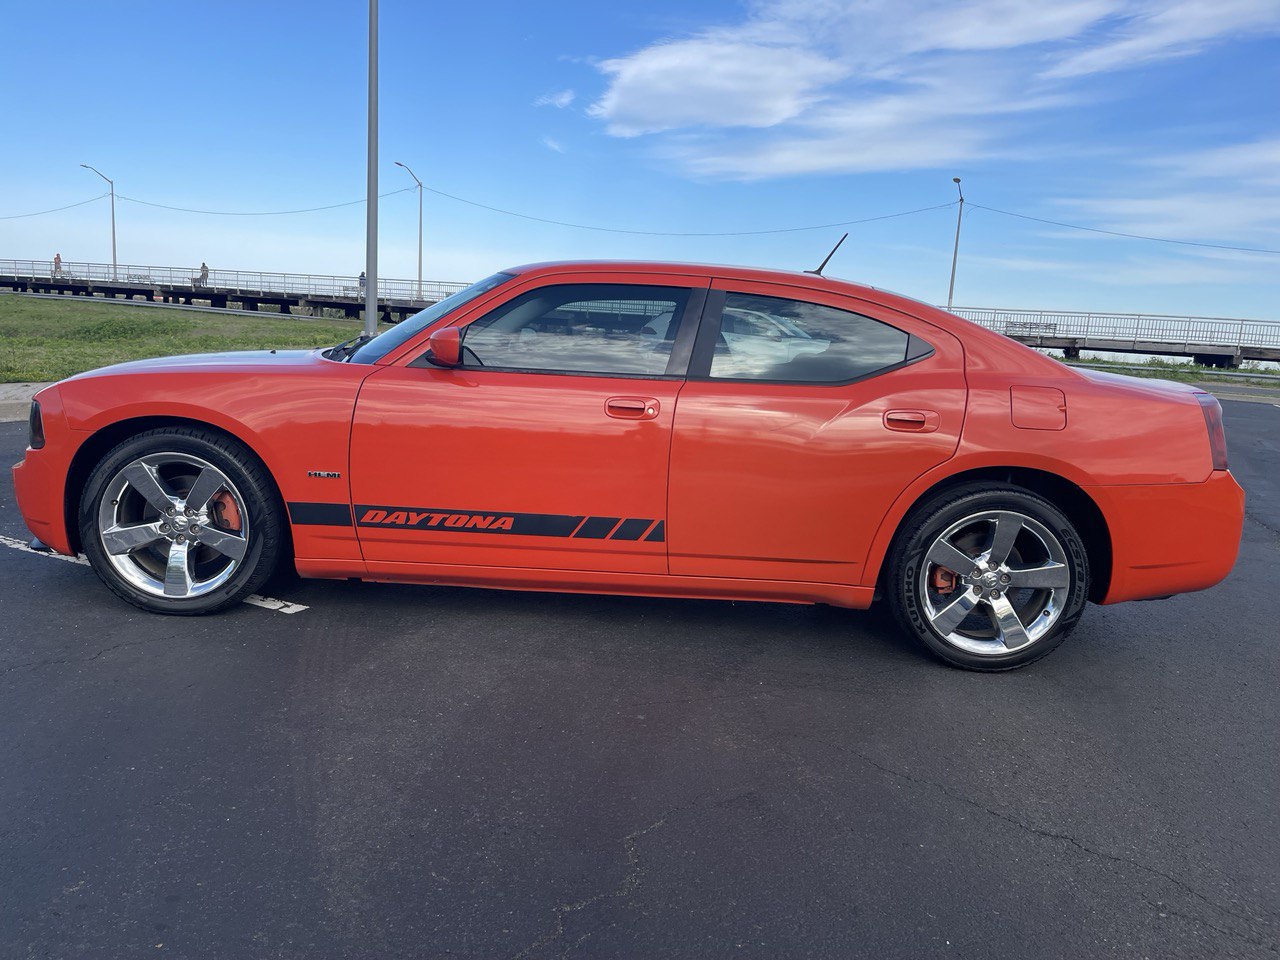 Used - Dodge Charger RT Sedan for sale in Staten Island NY